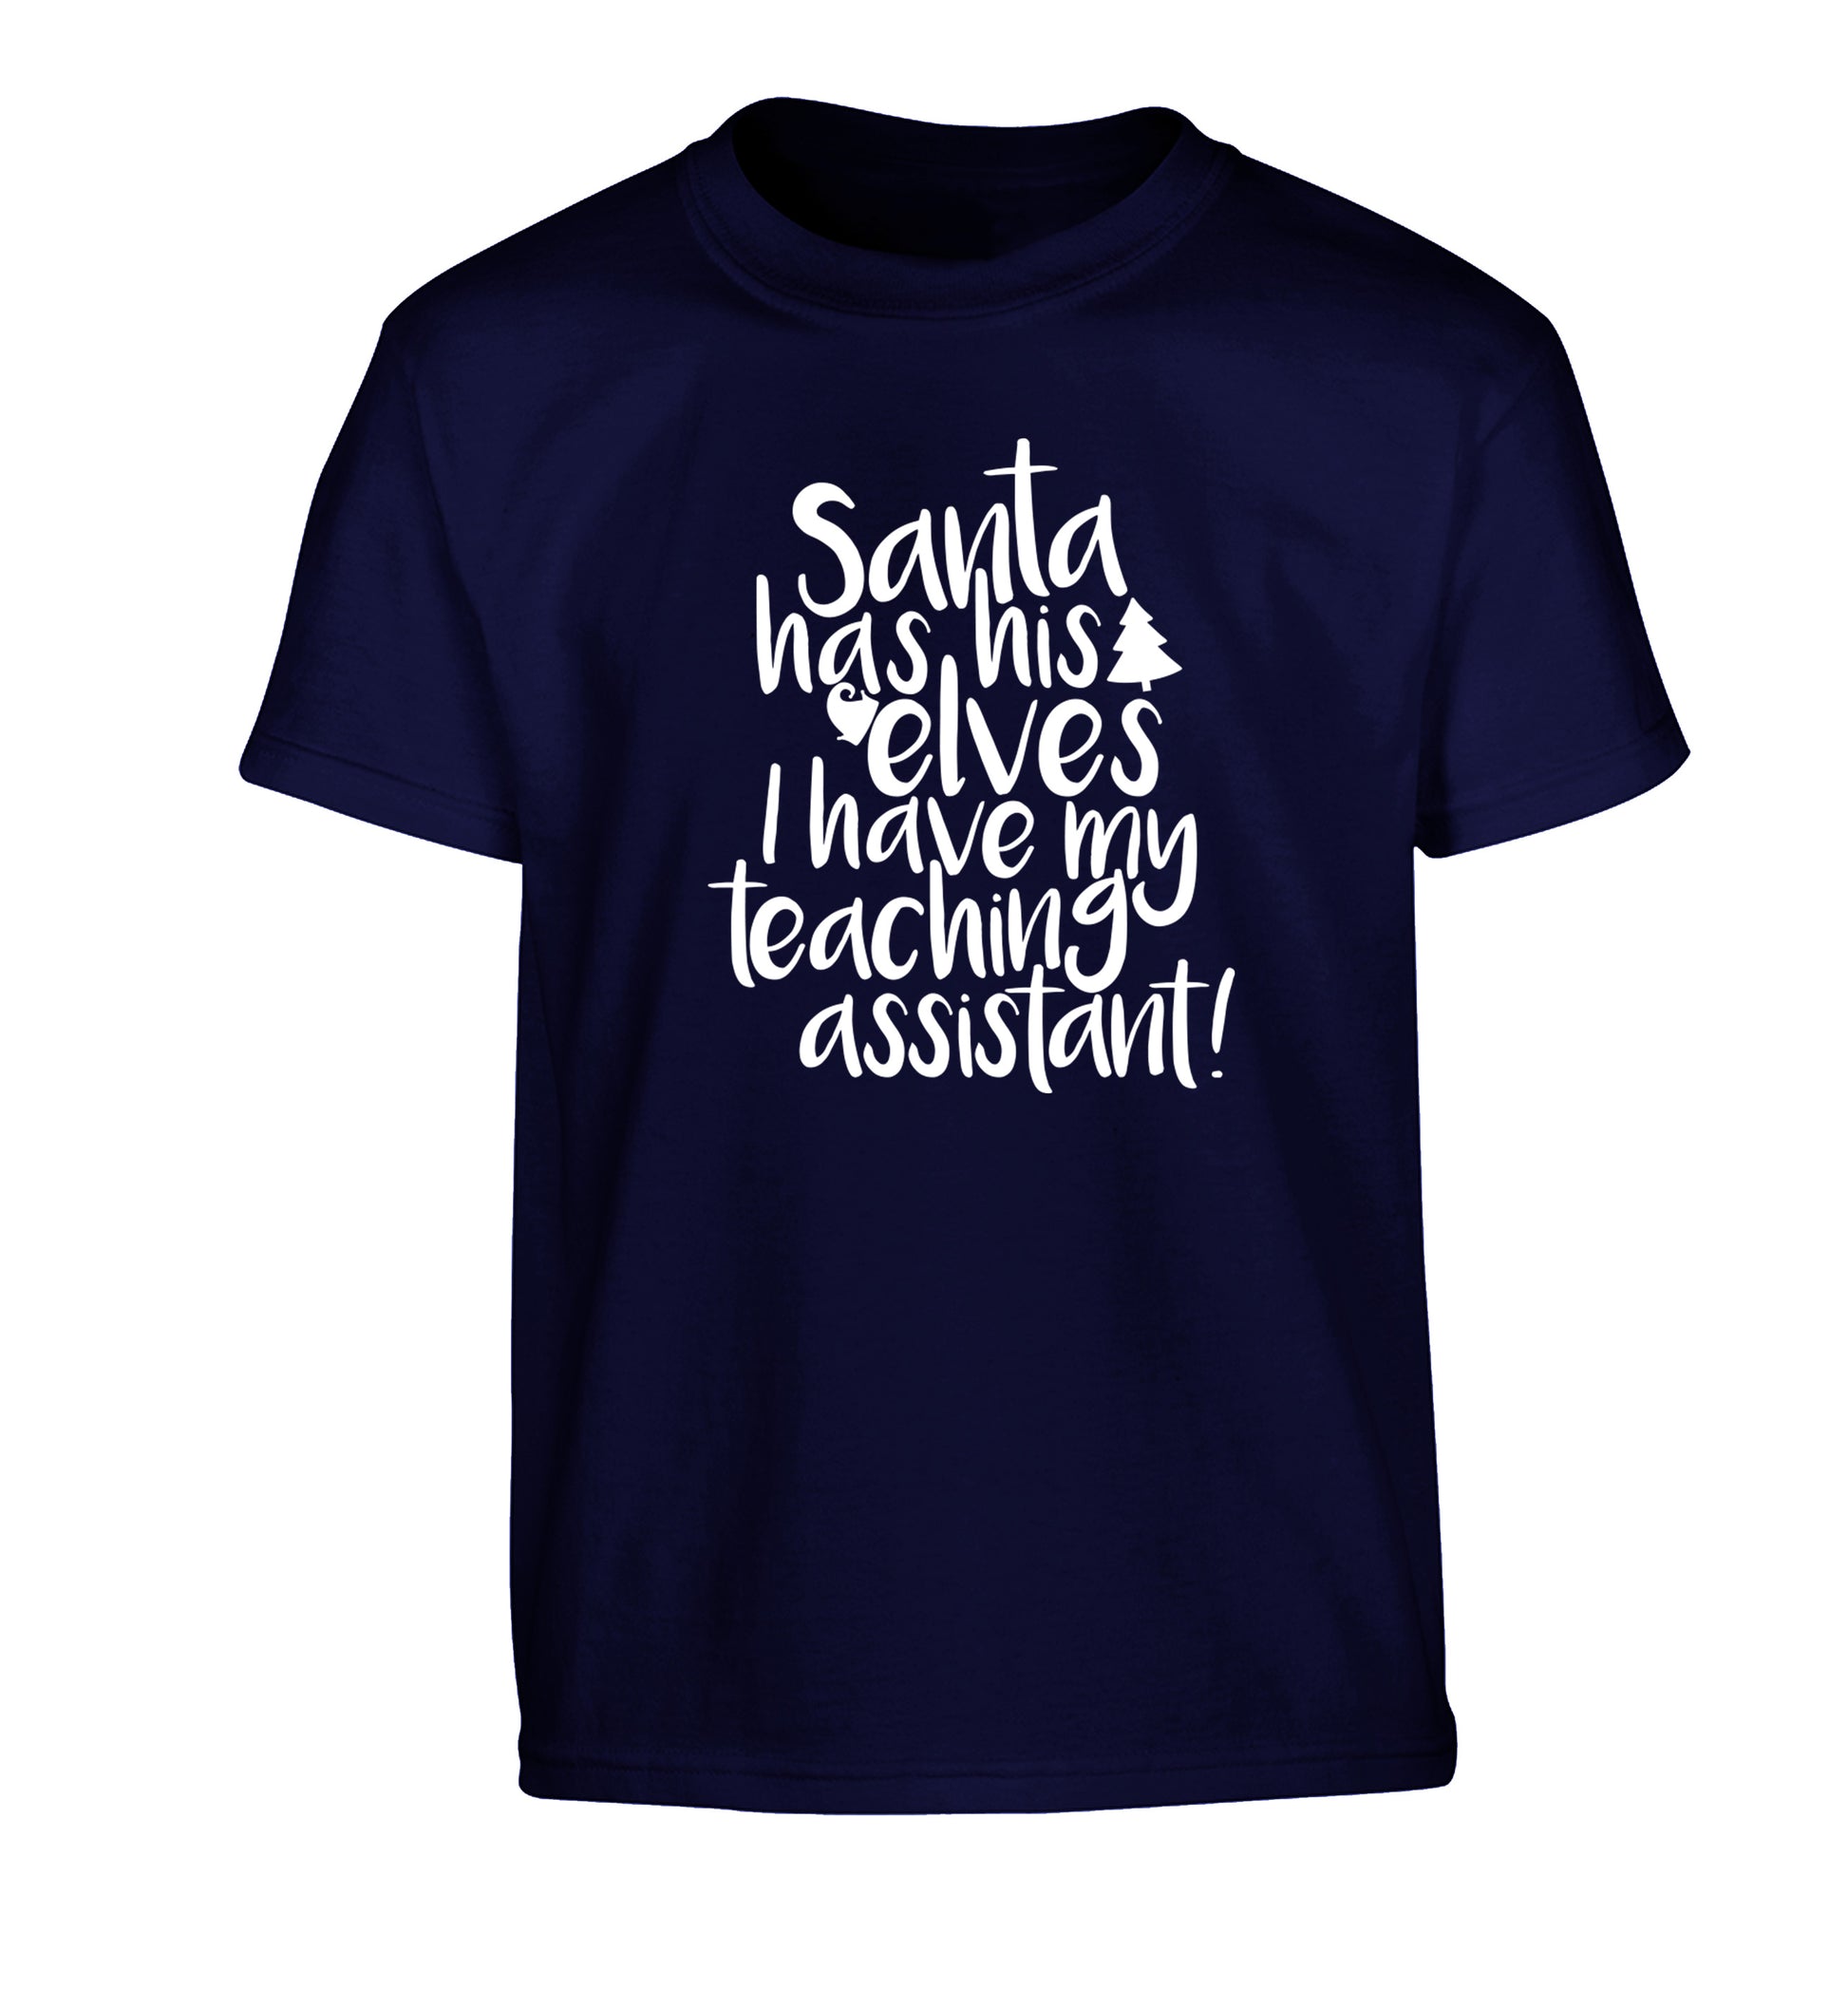 Santa has his elves I have my teaching assistant Children's navy Tshirt 12-14 Years